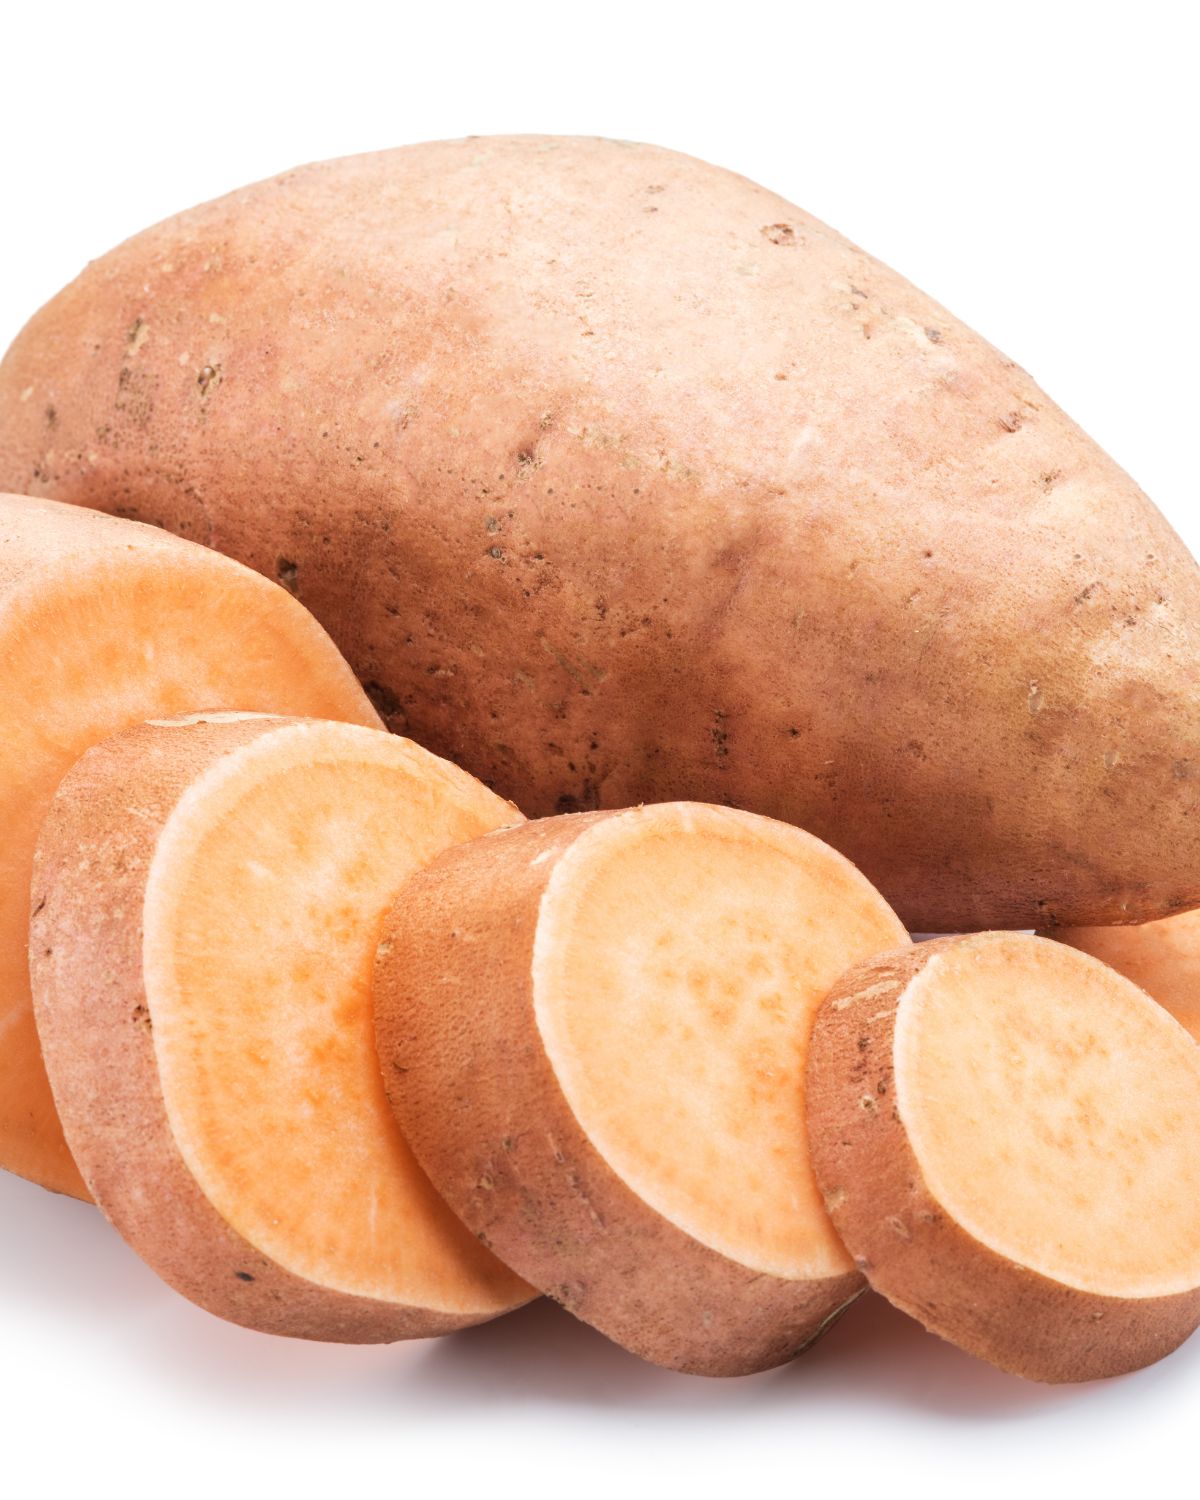 Sweet Potatoes for the maple dish.